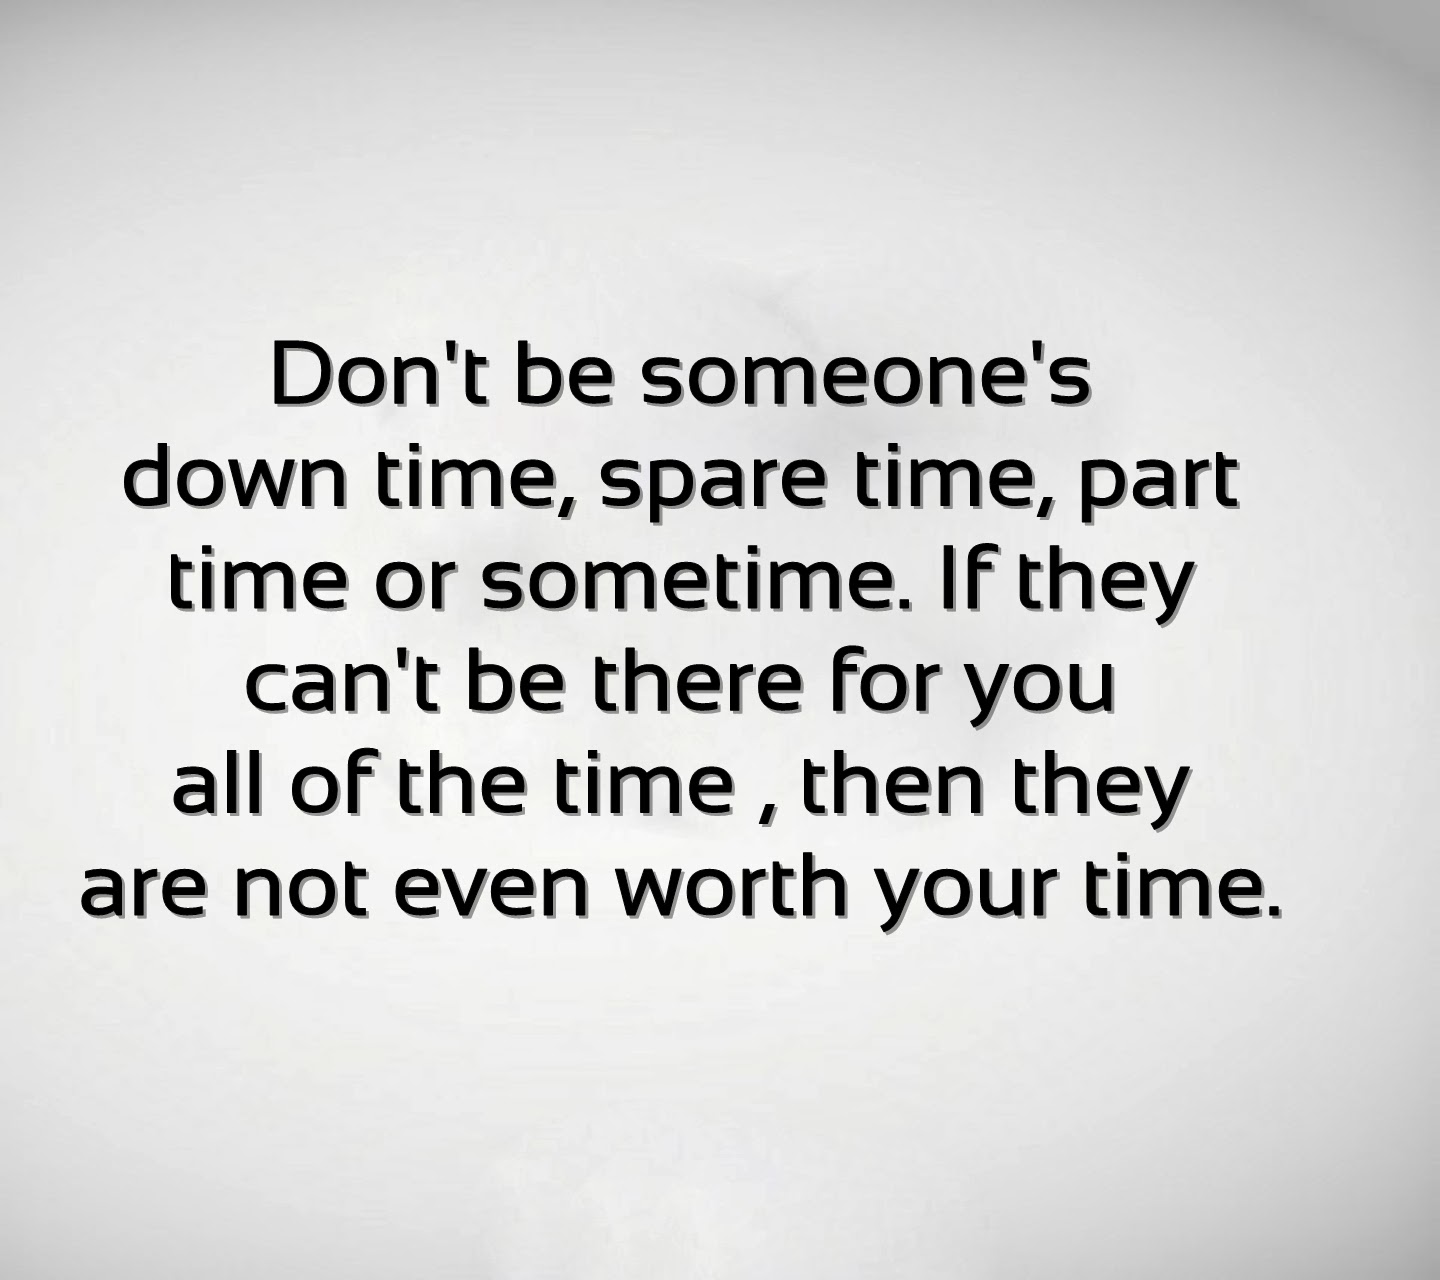 http://best-quotes-and-sayings.blogspot.com/2013/12/worth-your-time.html